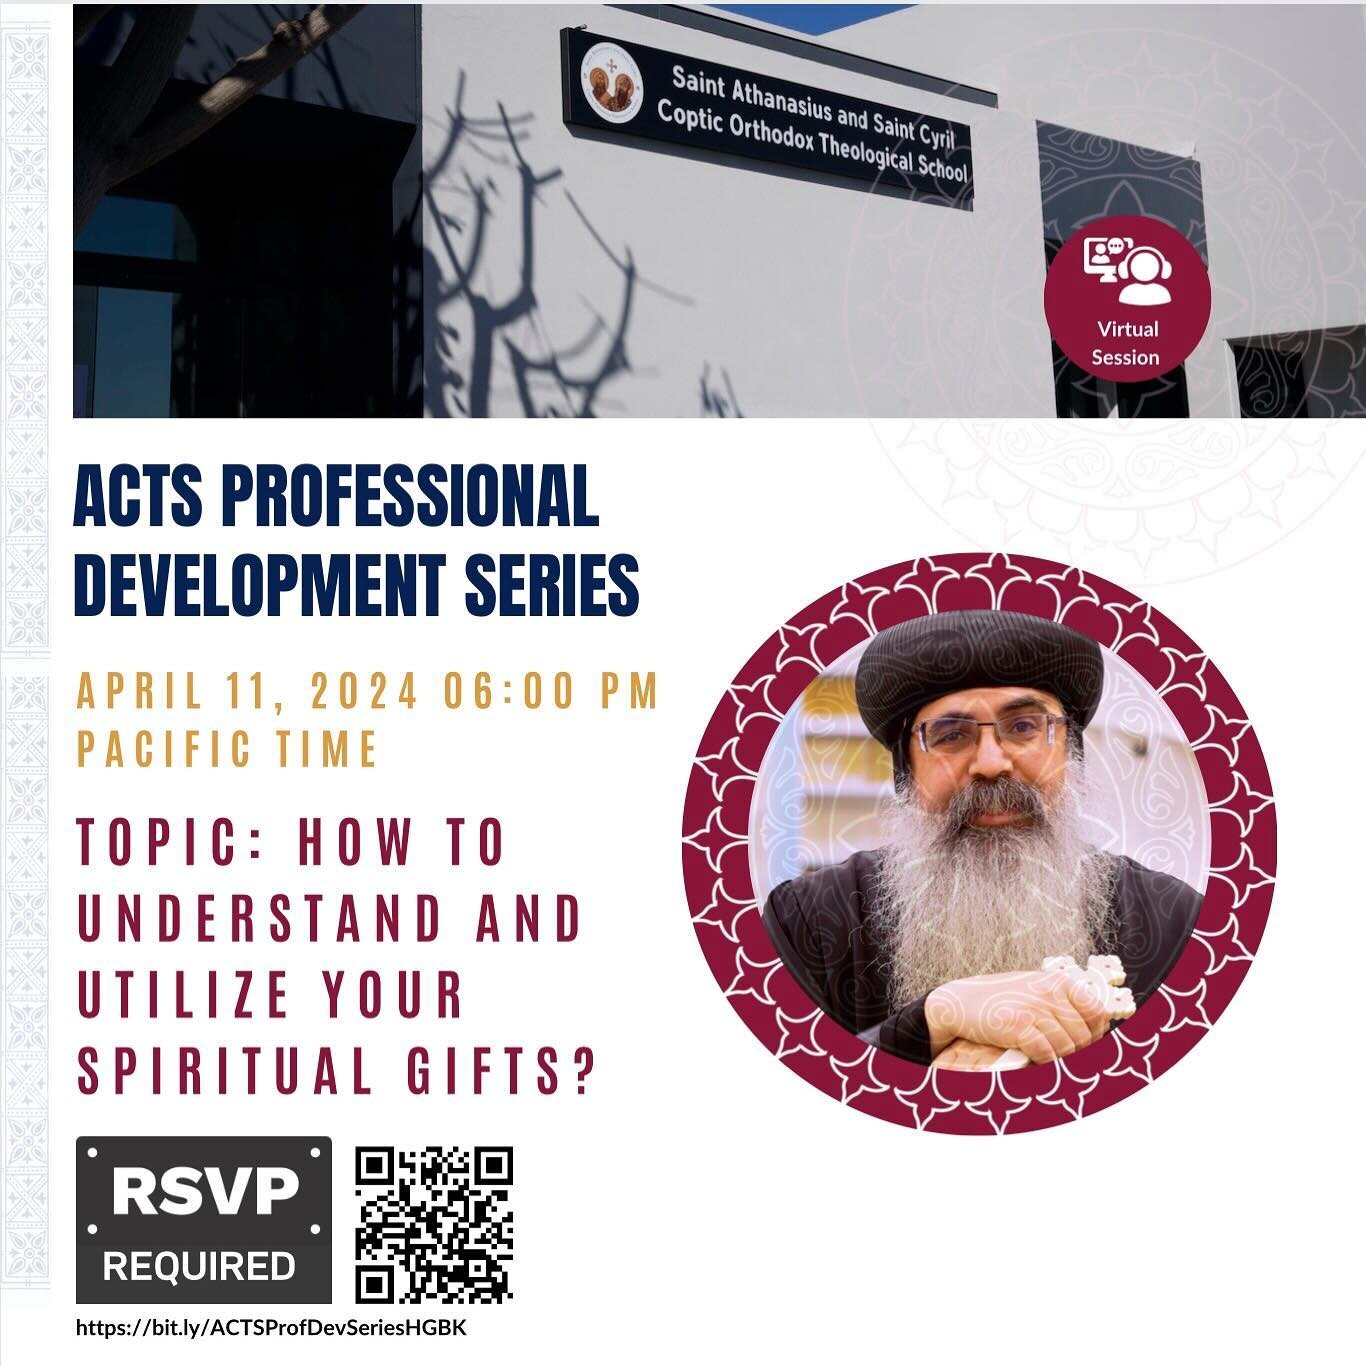 His Grace Bishop Kyrillos invites you to a special lecture on understanding and utilizing your spiritual gifts. Join us as we explore the sacred journey of self-discovery and service, delving into the divine talents bestowed upon us by the grace of G